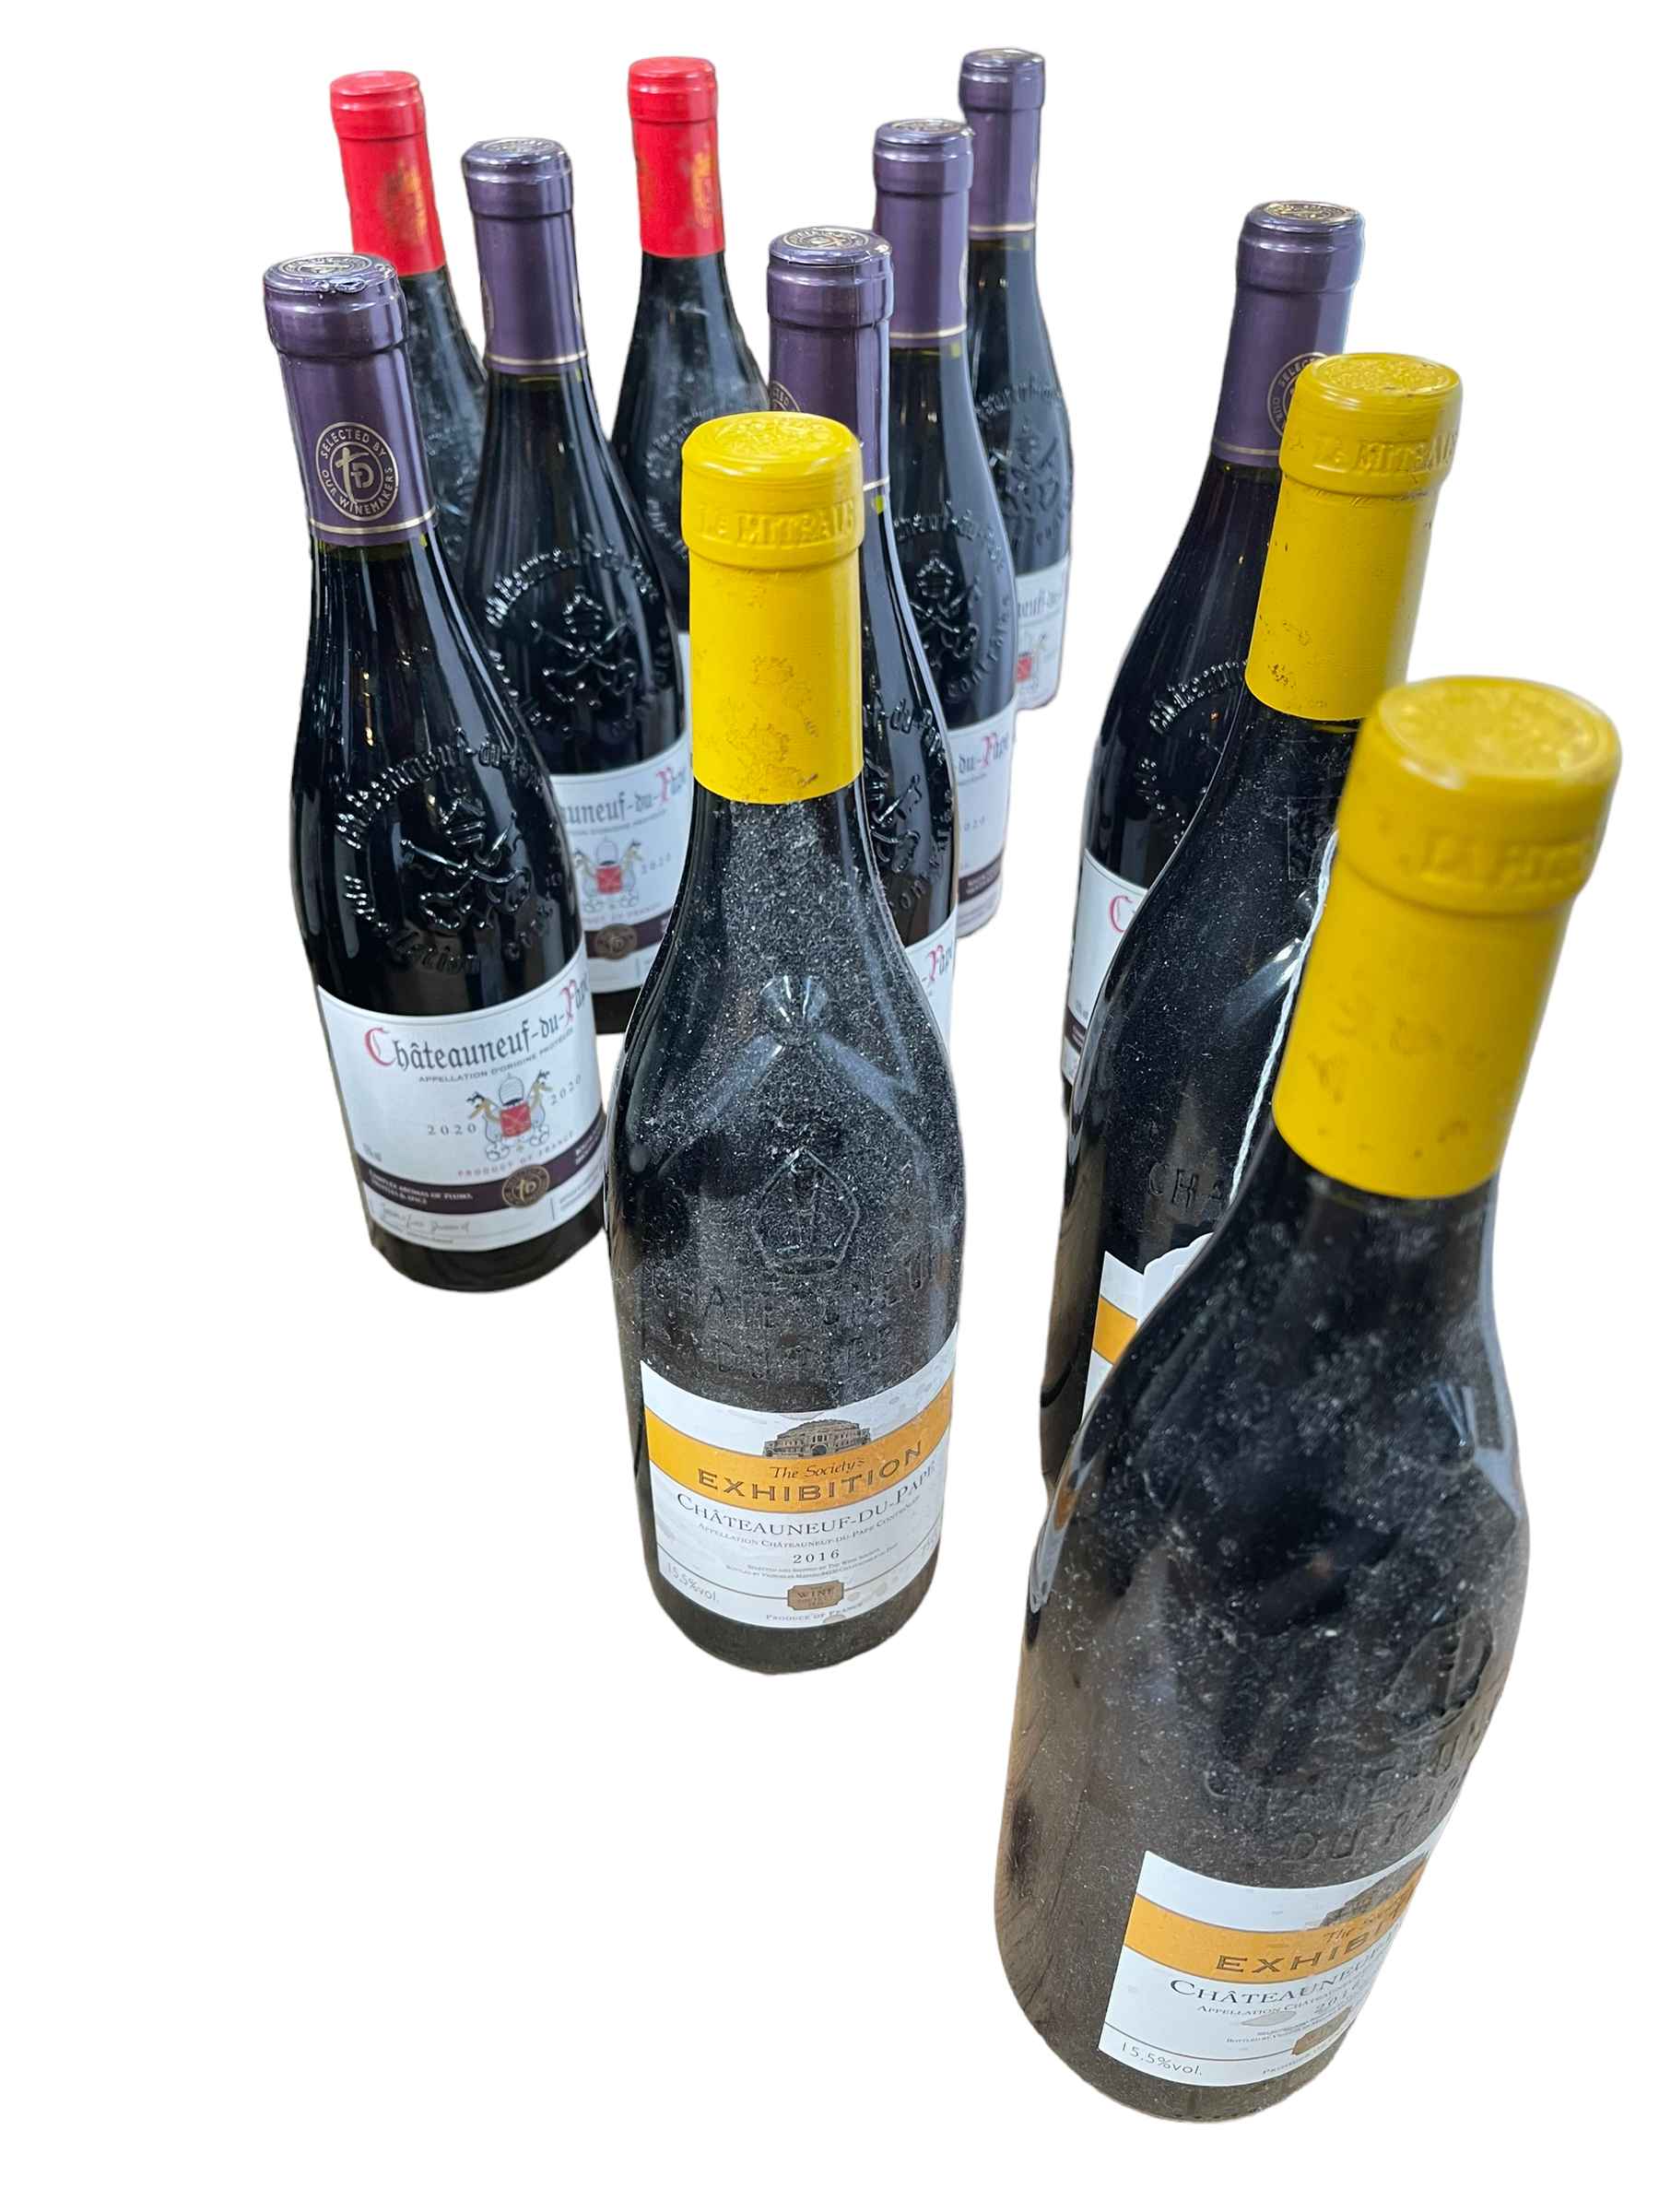 Eleven bottles of red wine including Chateauneuf Du Pape 2019 and 2020,